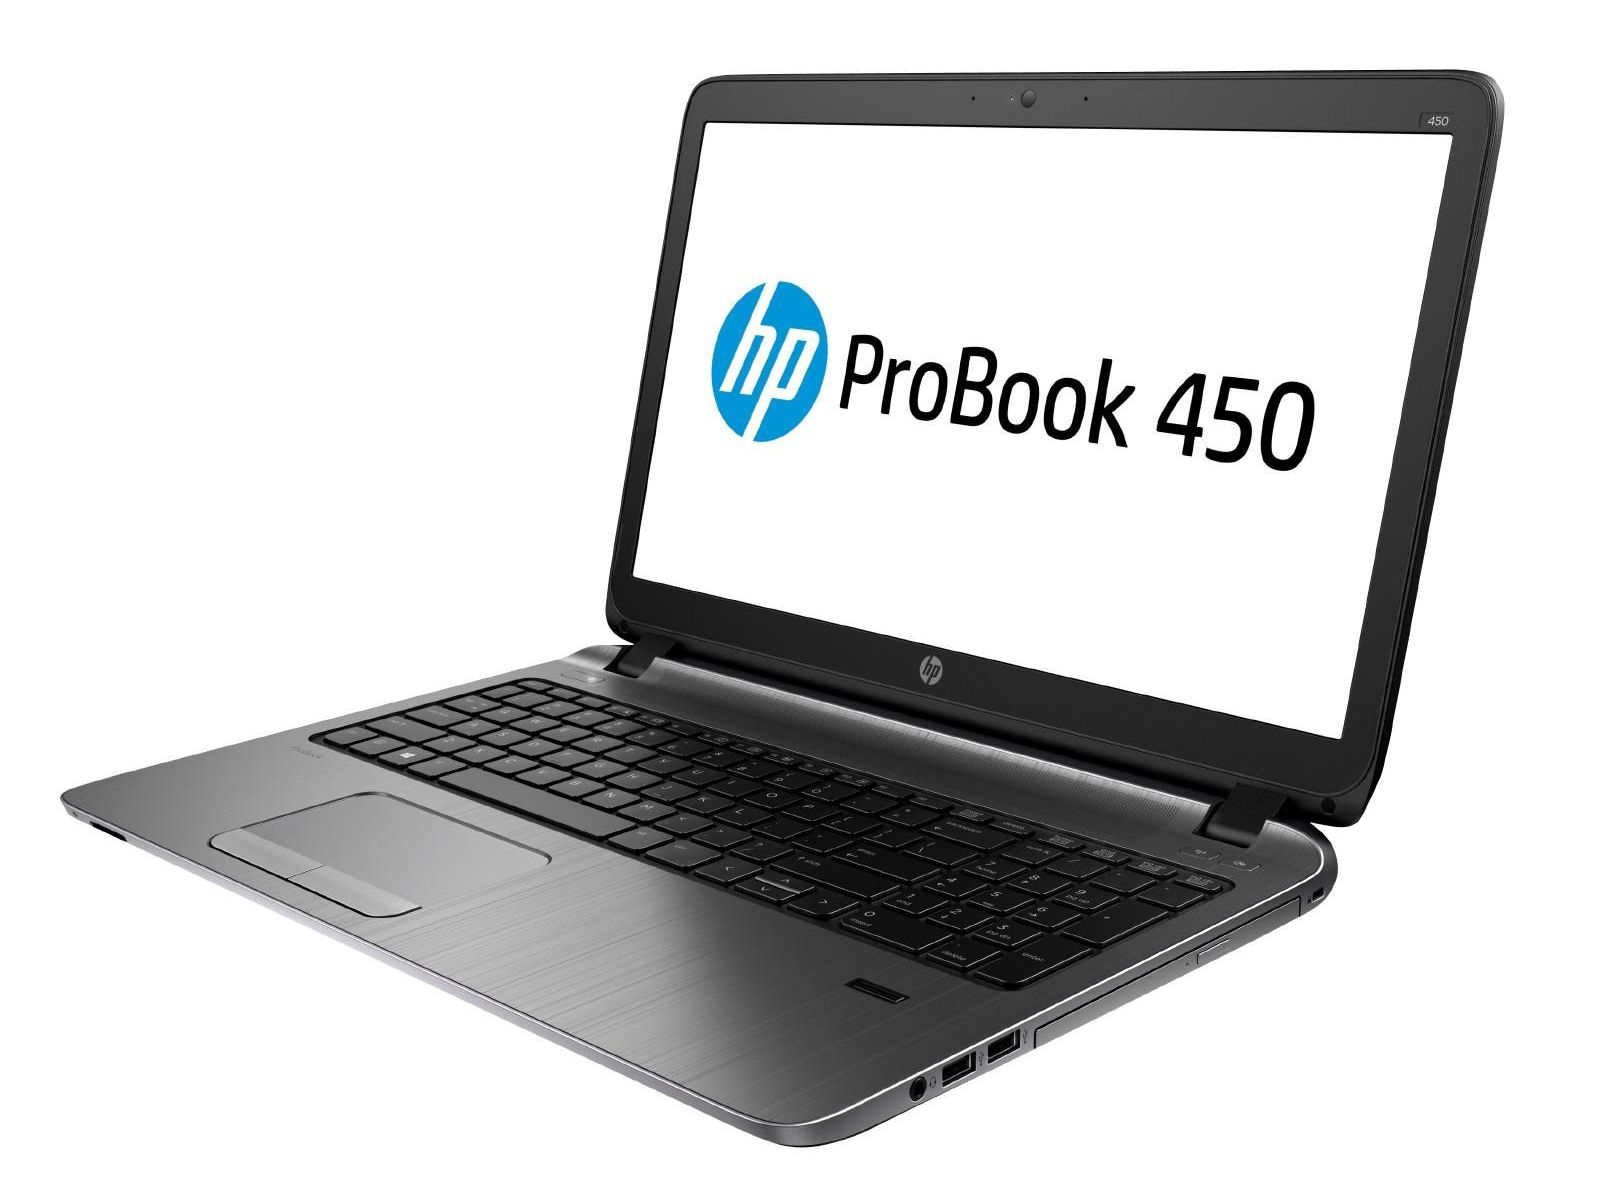 HP Probook 450 G3 Review | Laptops Review And Price